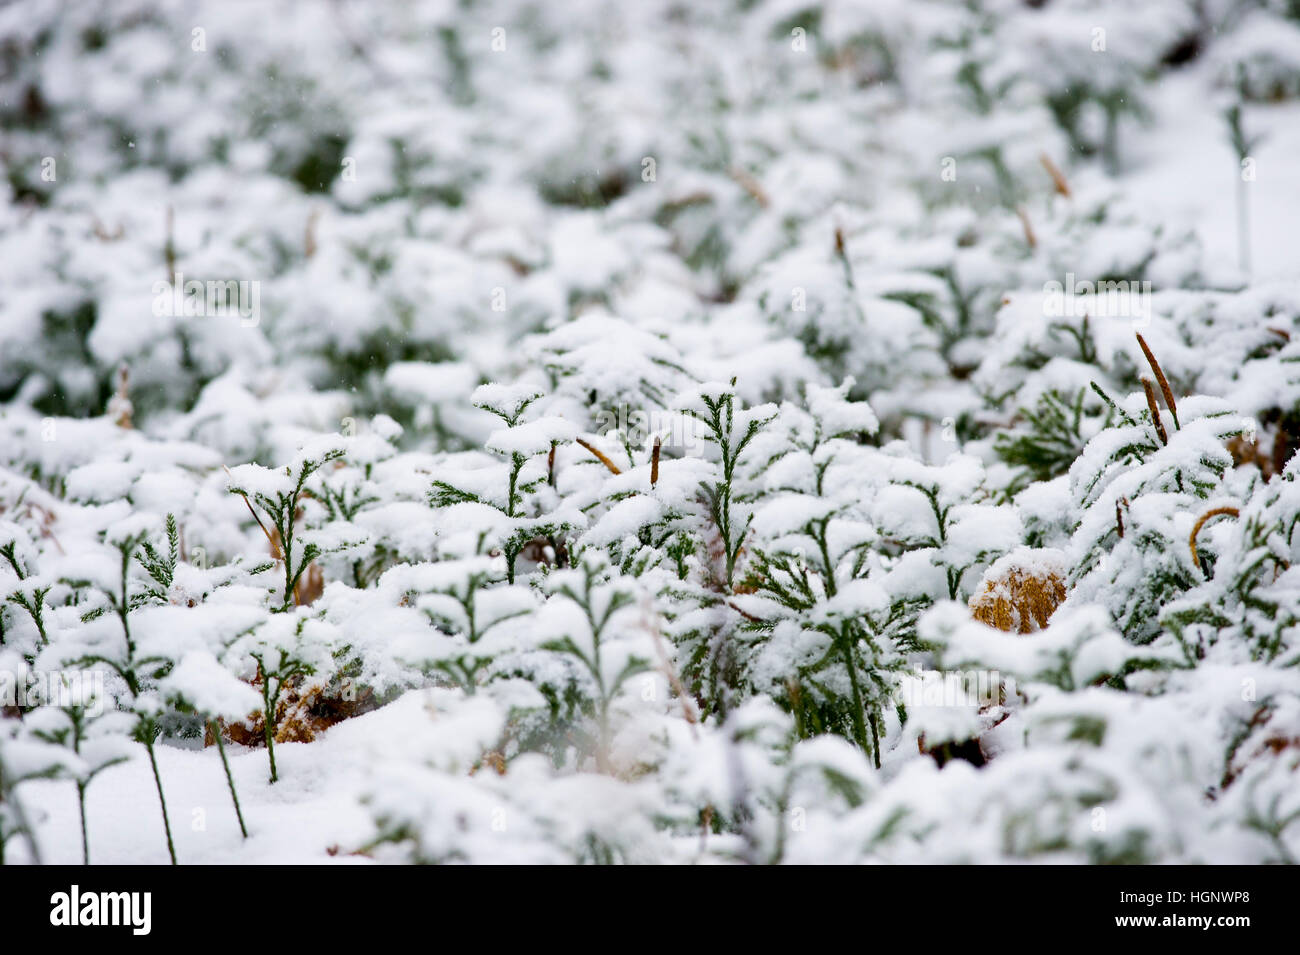 A small patch of green gound pine covered in snow. Stock Photo